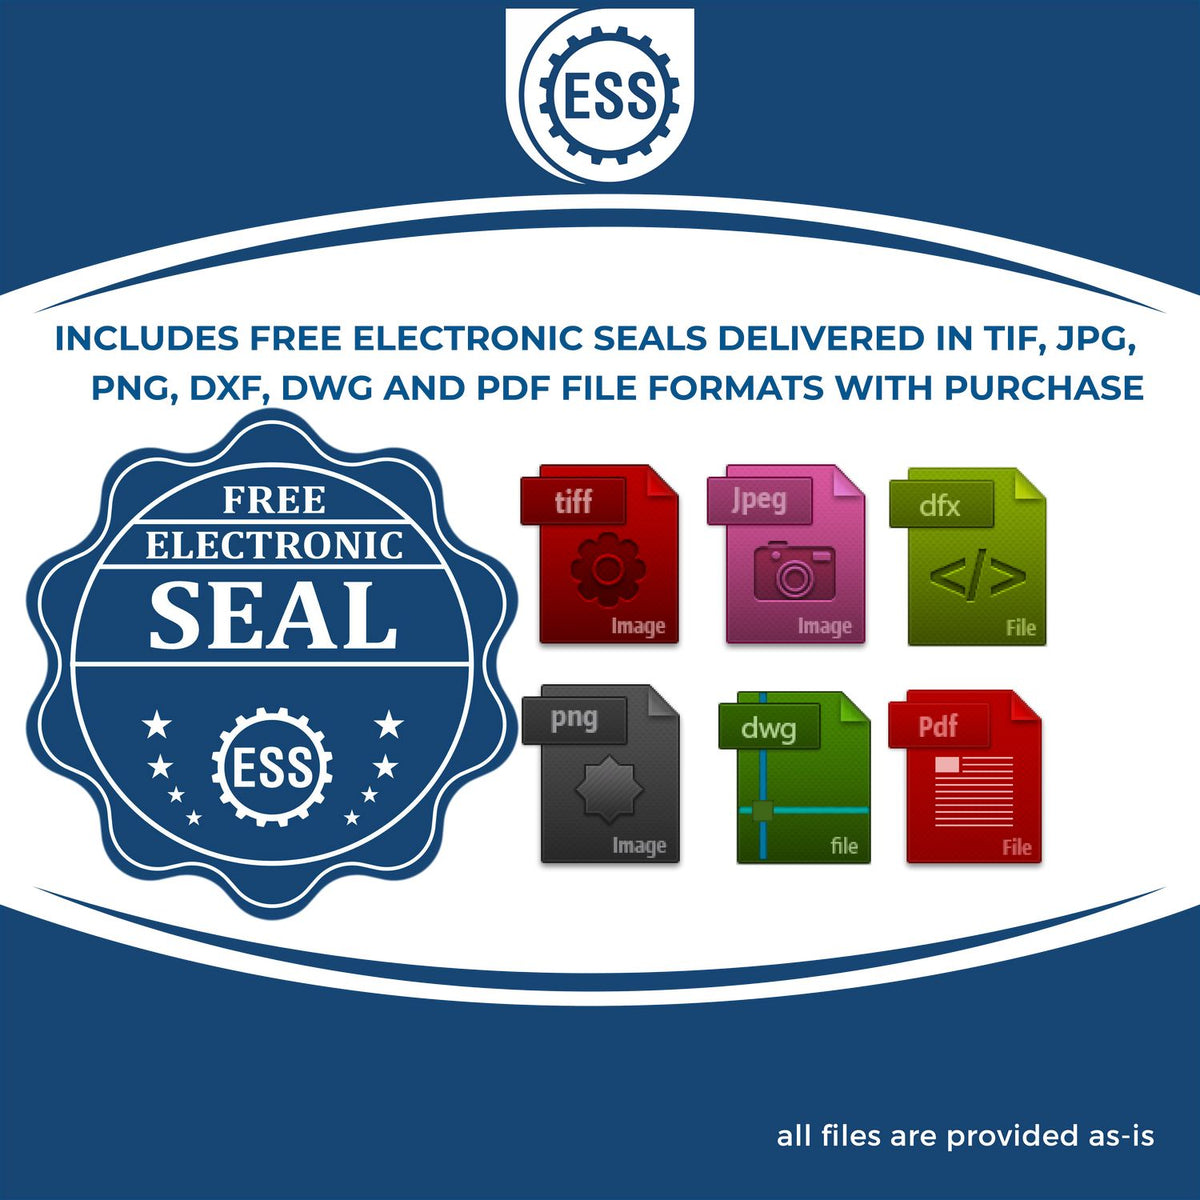 An infographic for the free electronic seal for the Extended Long Reach Louisiana Surveyor Embosser illustrating the different file type icons such as DXF, DWG, TIF, JPG and PNG.